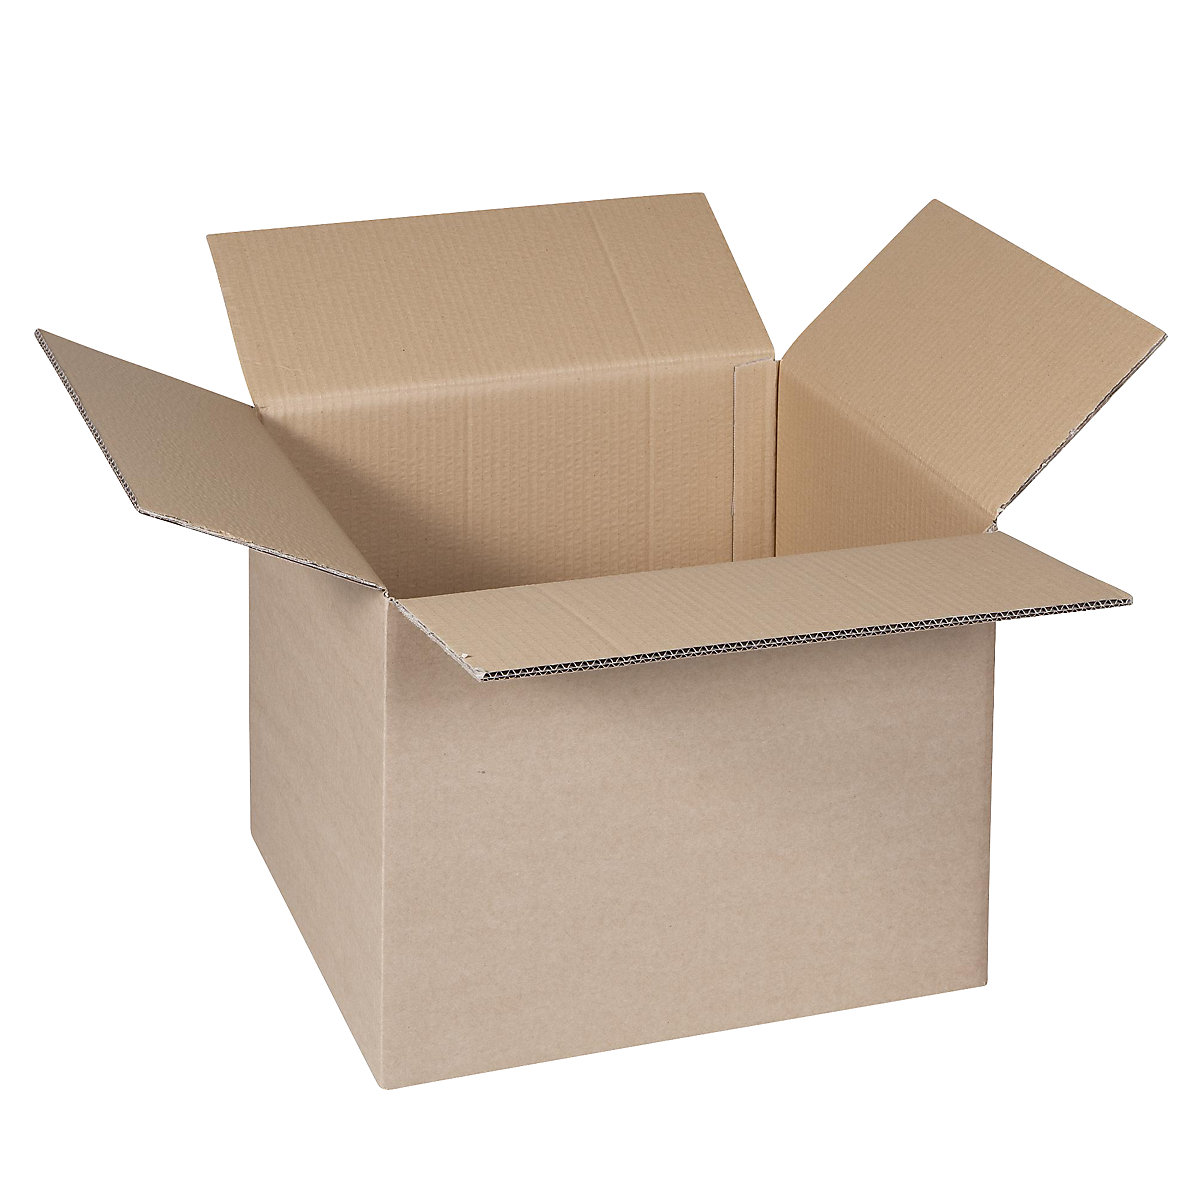 Folding cardboard box, FEFCO 0201, made of double fluted cardboard, internal dimensions 605 x 580 x 450 mm, pack of 100-7